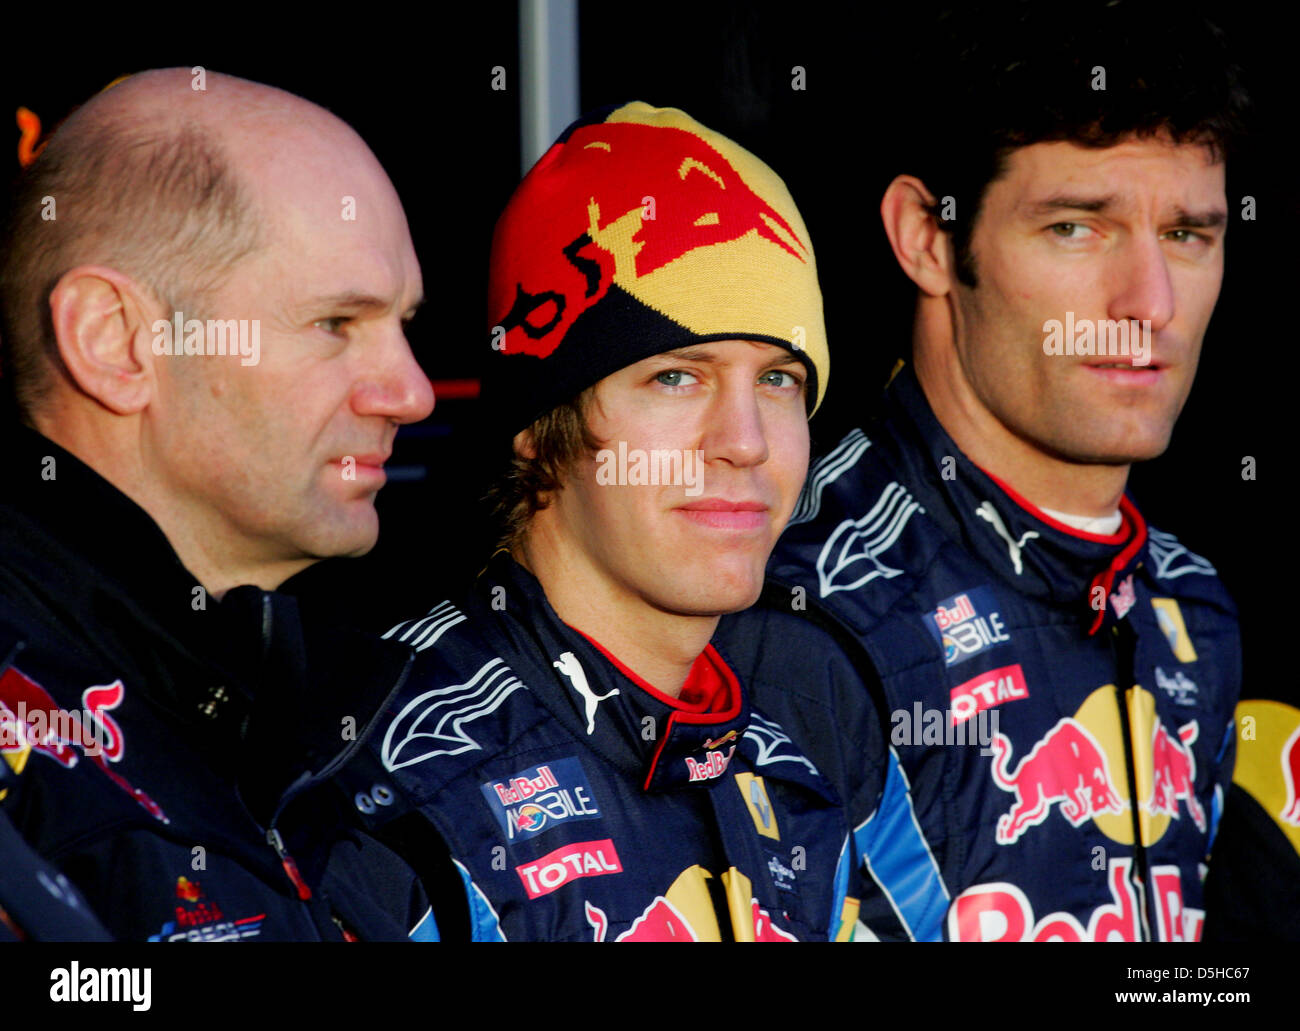 German Formula One driver Sebastian Vettel (C) of Red Bull, his teammate, Australian driver Mark Webber (R), and technical director and head designer Adrian Newey present the new Red Bull Racing race car RB6 in Jerez de la Frontera, Spain, 10 February 2010. Vice world champion Vettel will test the RB6 for the first time on 12 February 2010. The Formula One 2010 season will start on Stock Photo